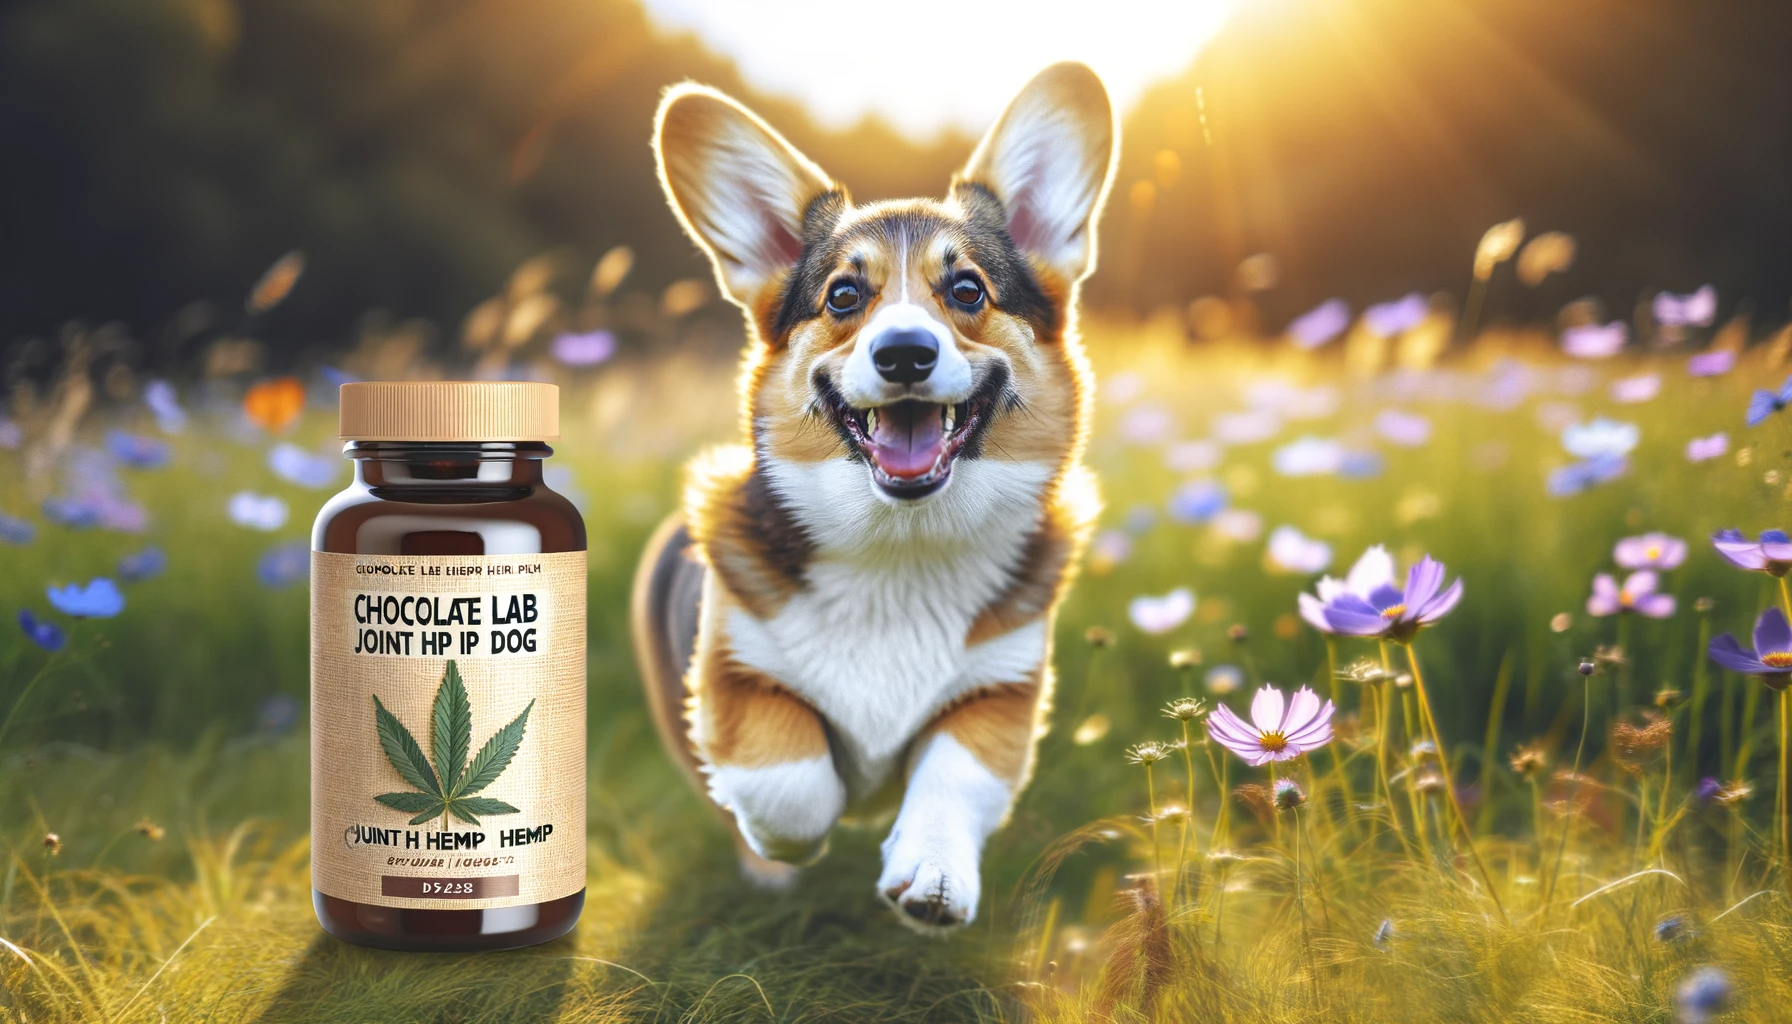 Corgidor happily running in a field, with a bottle of Chocolate Lab Joint Hip Dog Hemp D528 in the background